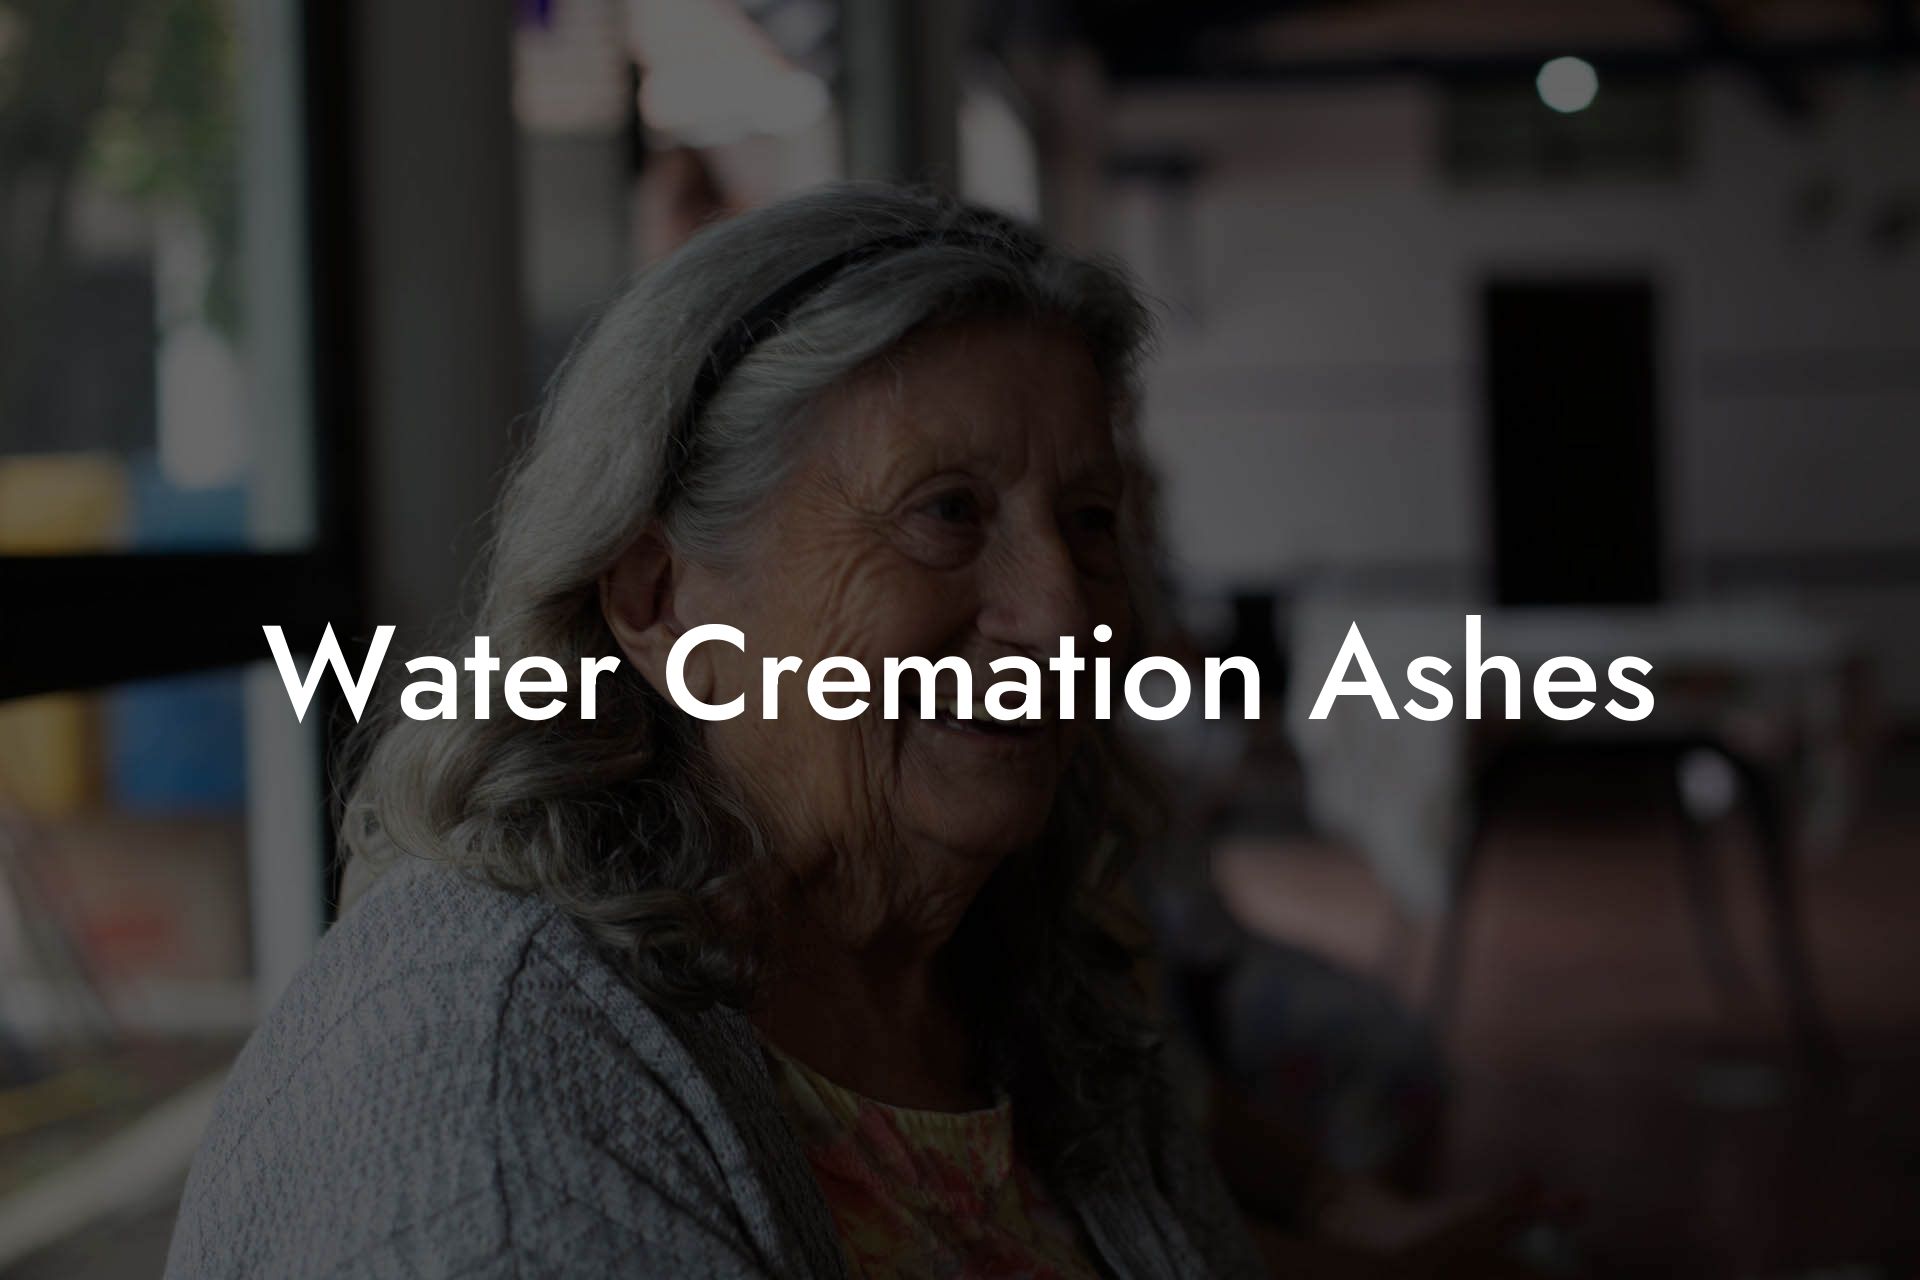 Water Cremation Ashes